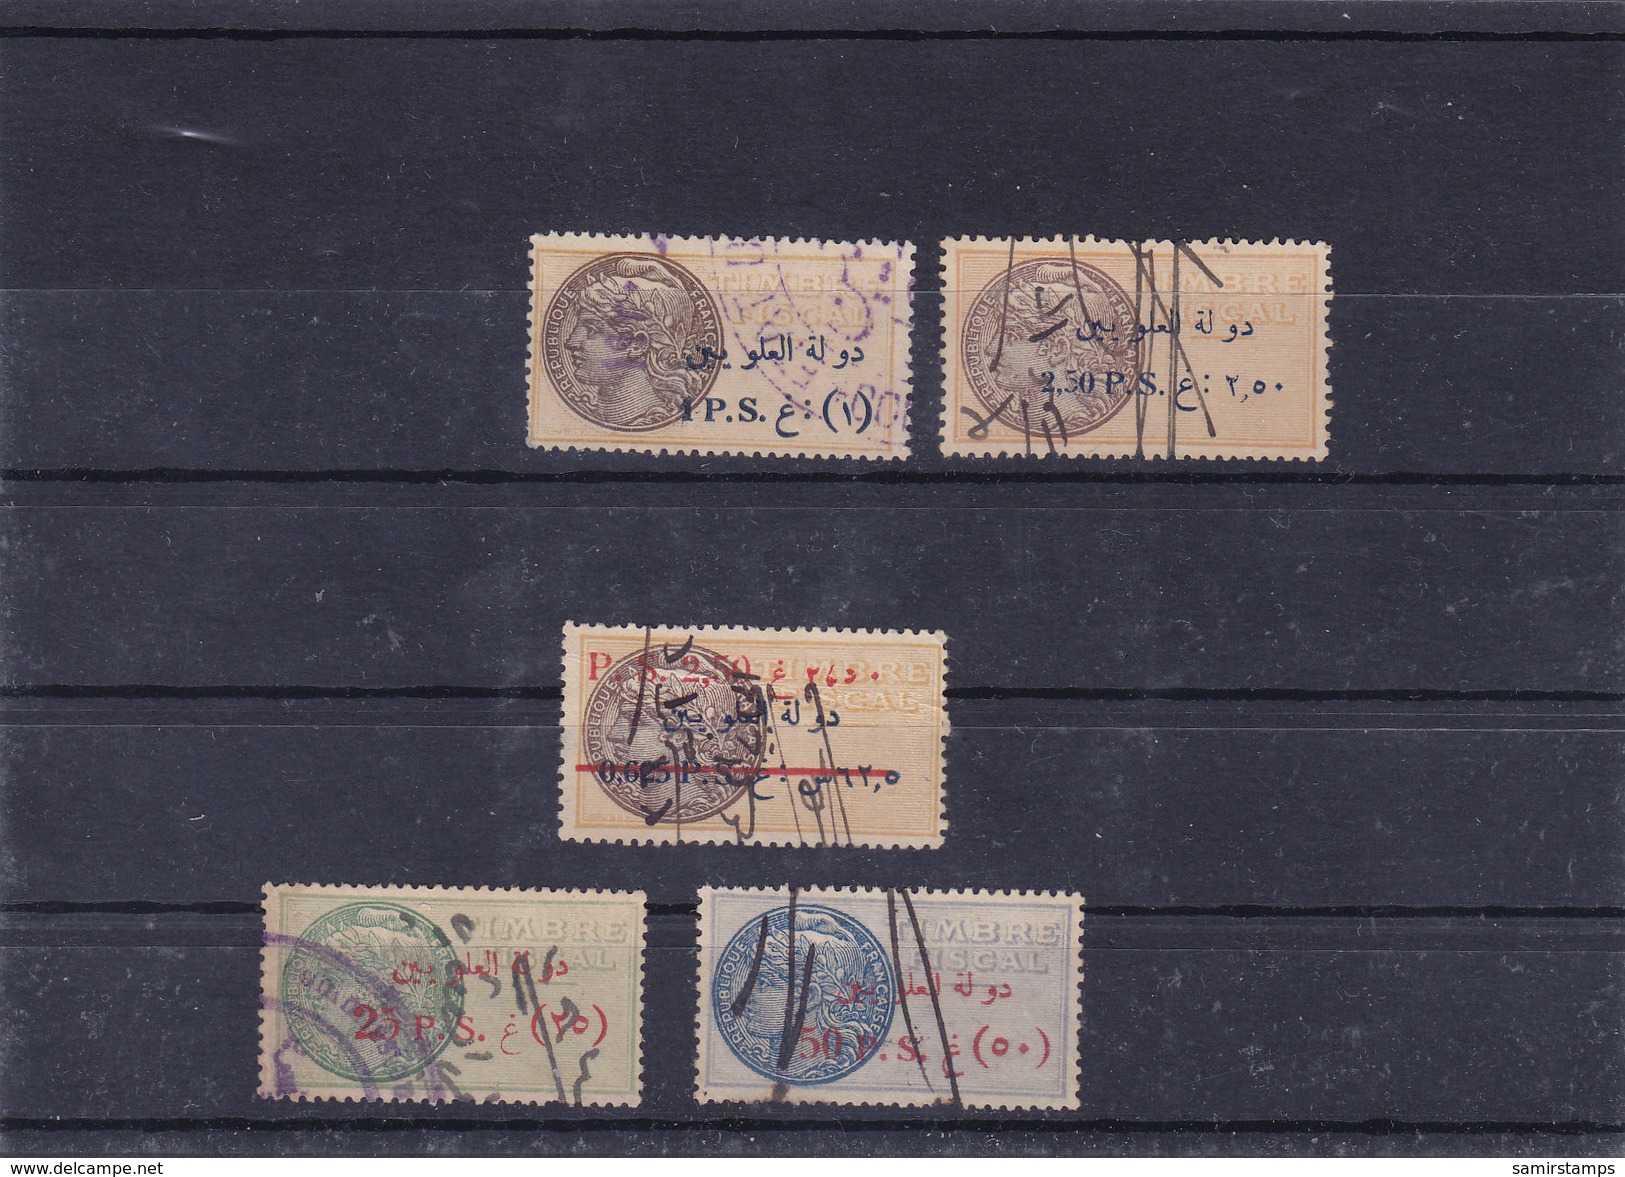 Alaouites Revenues French Mandate 5 Stamps Incl.high Values 25 & 50 P. Fine Condit- SKRILL PAY ONLY - Used Stamps